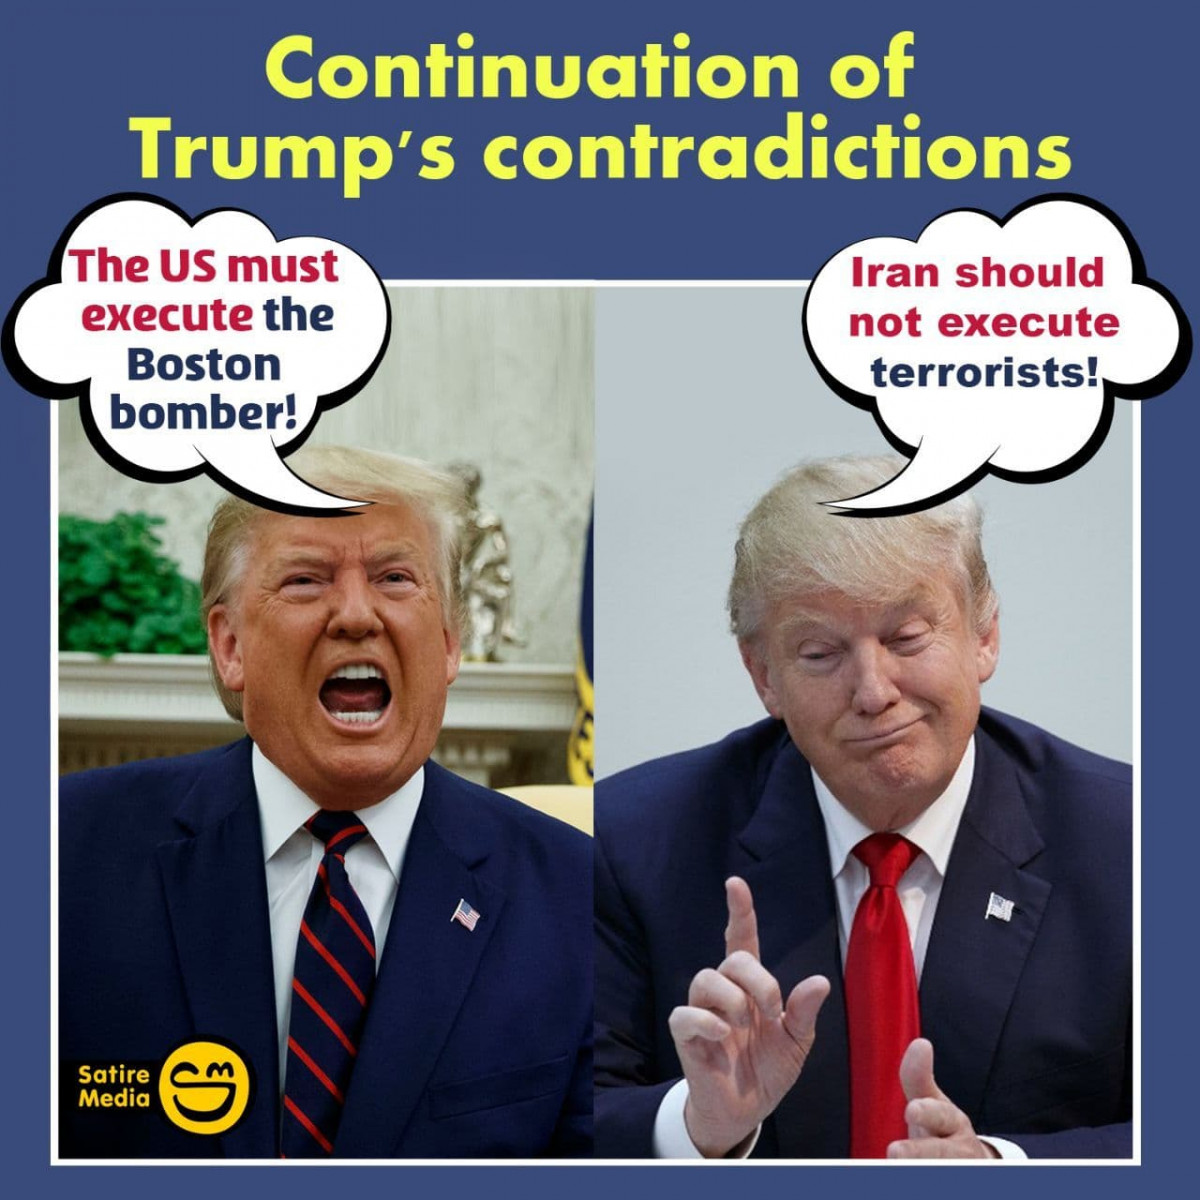 Continuation of Trump's contradictions